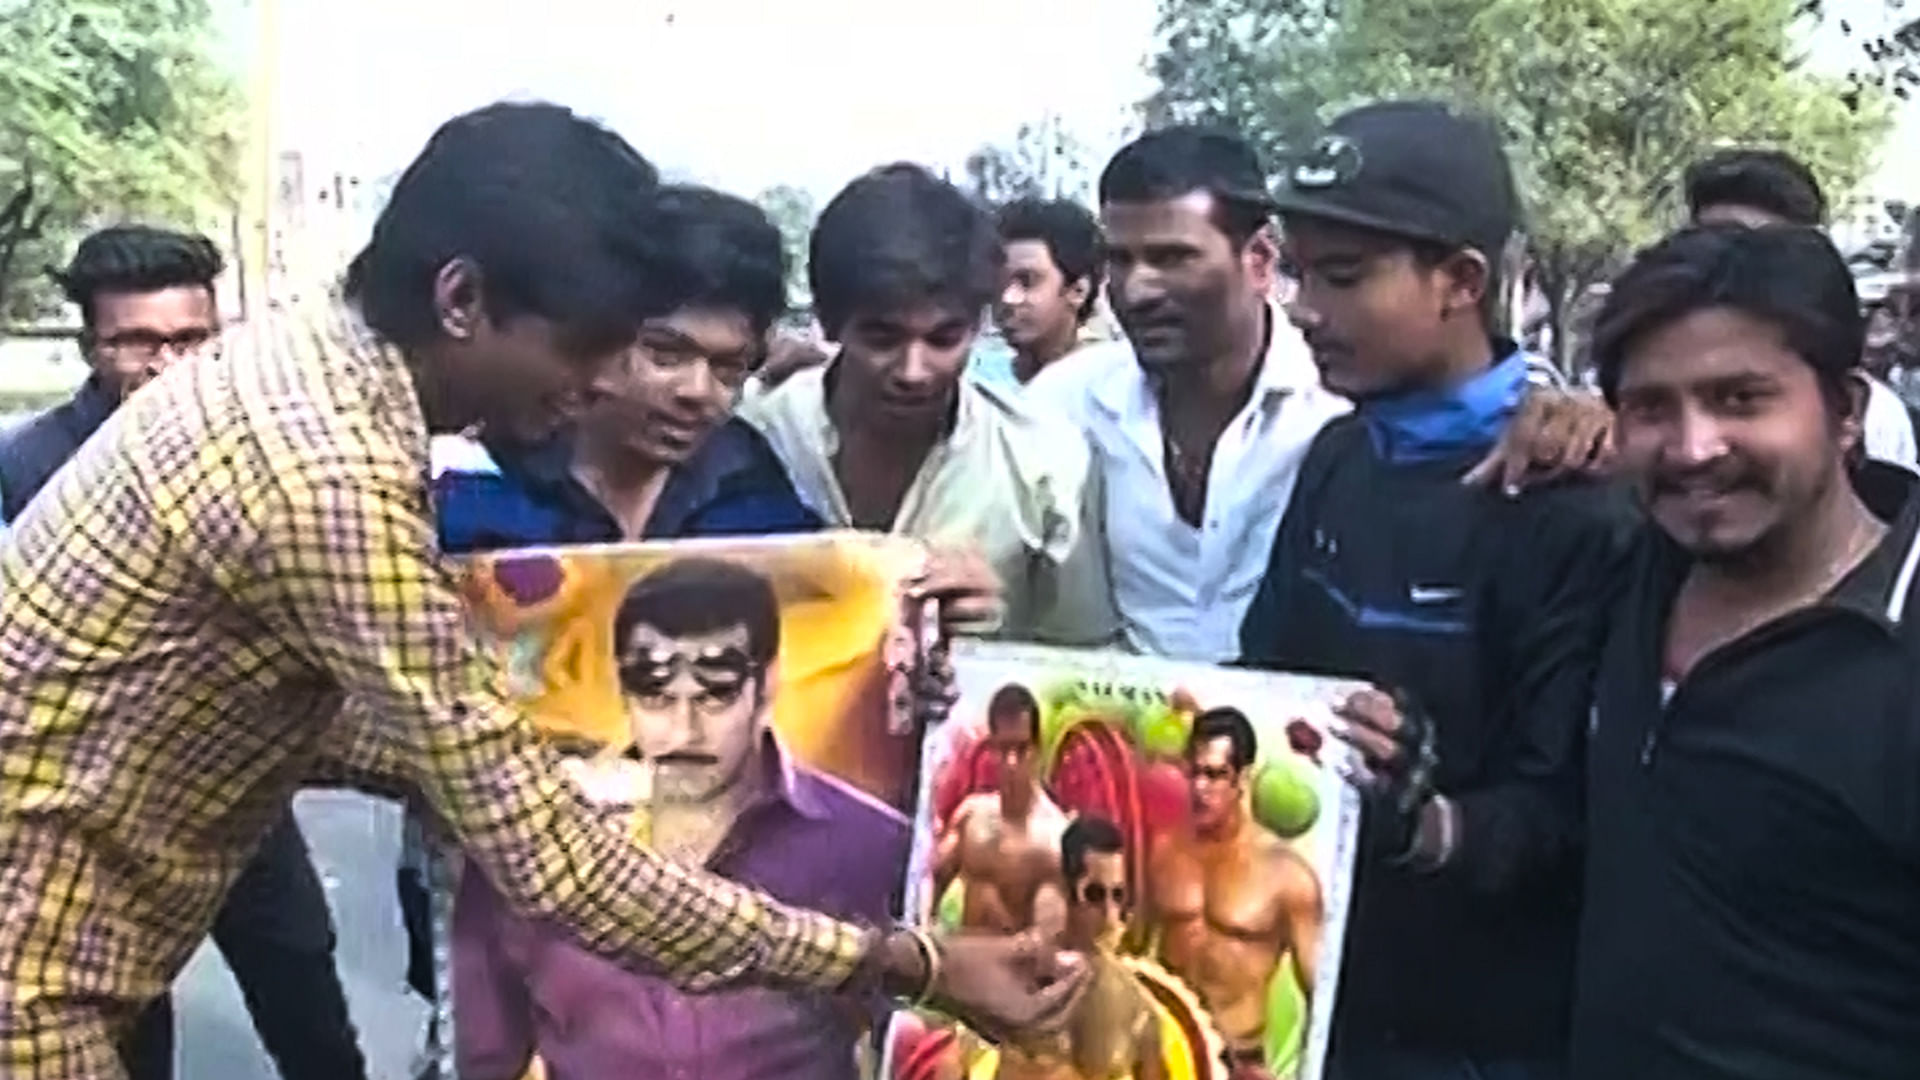 Salman Khan fans in Bhopal rejoice his acquittal in the 2002 hit and run case. (Photo: ANI screengrab)